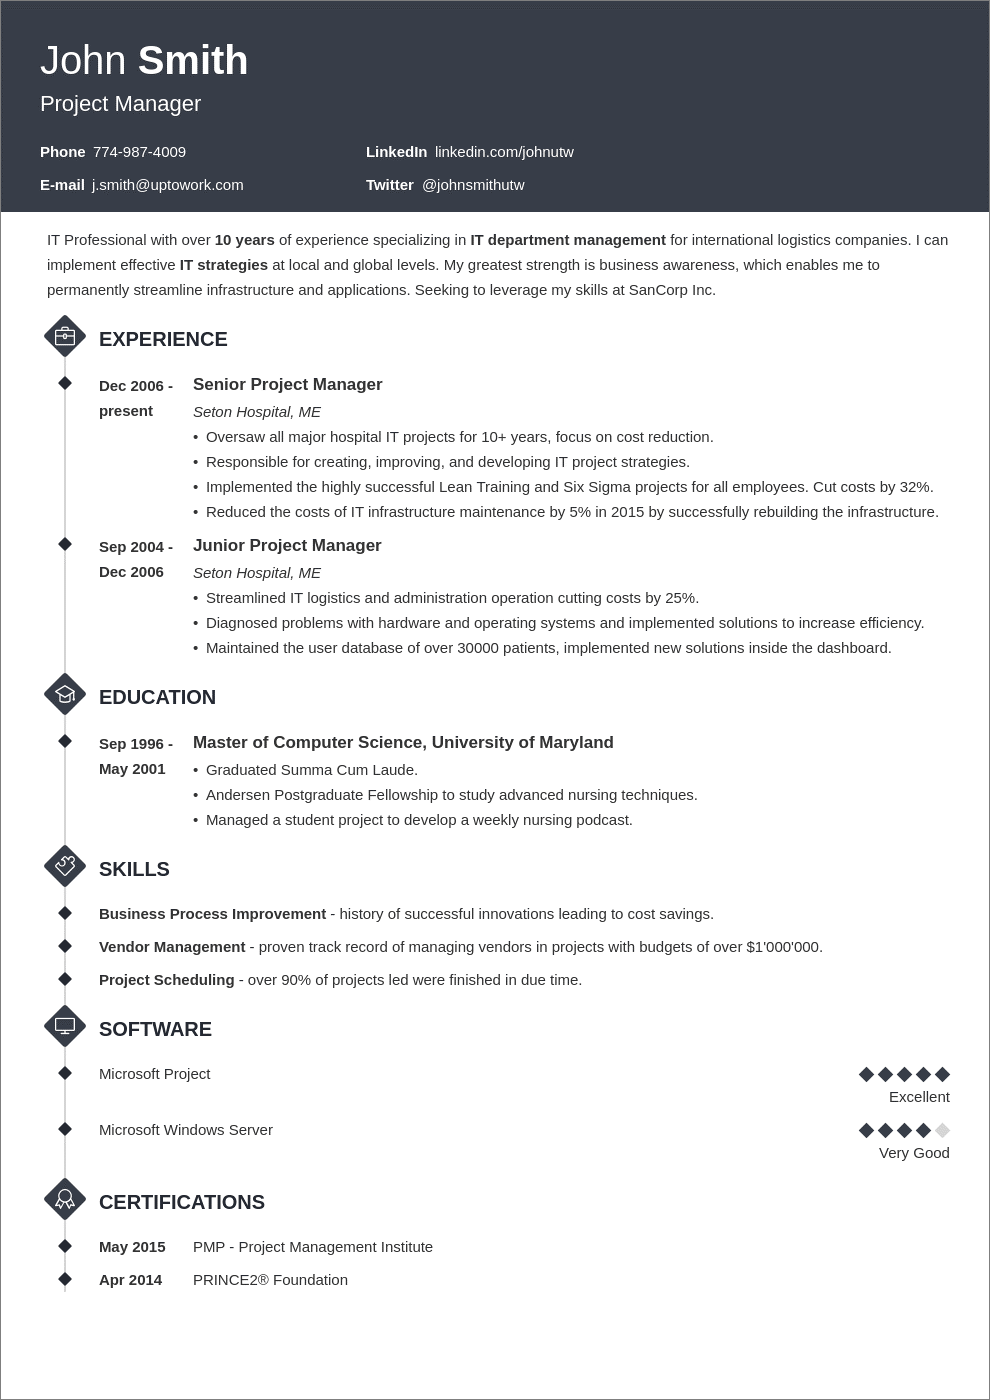 one-page CV style